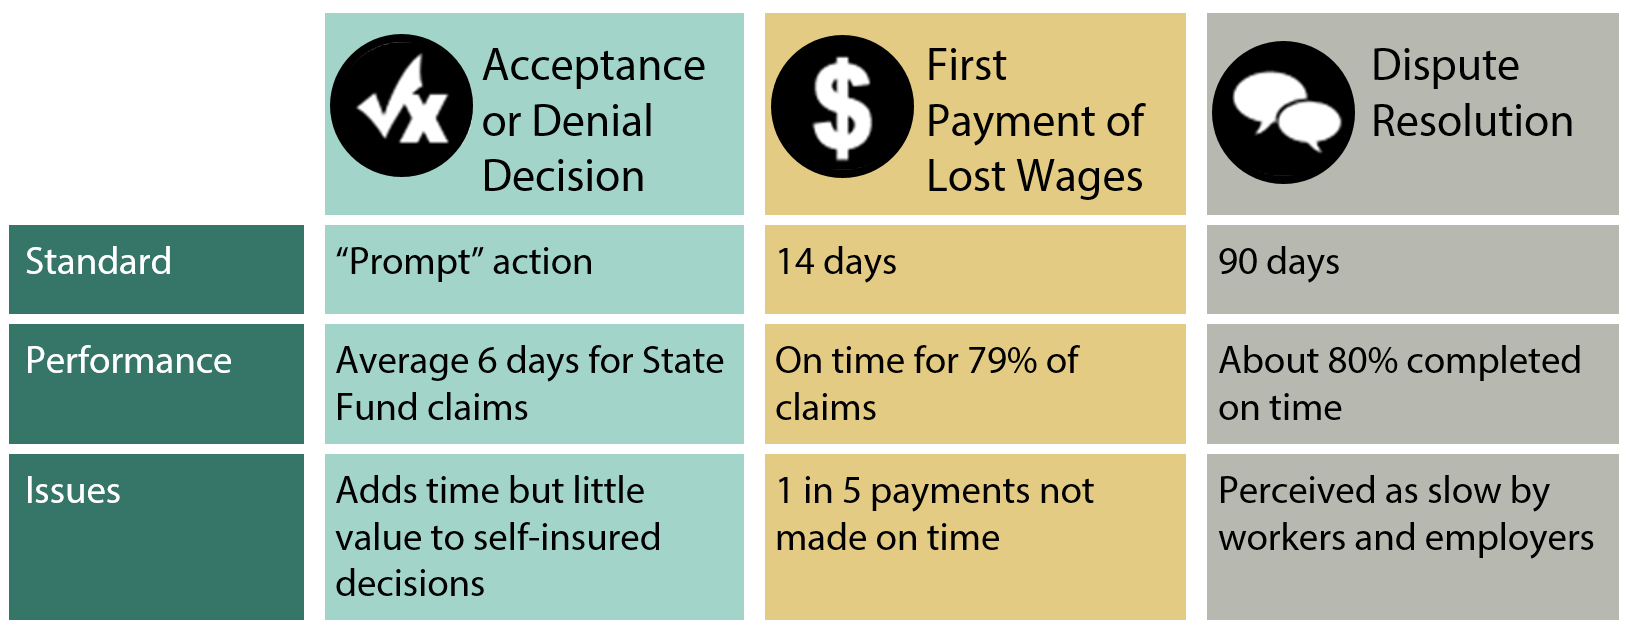 Table that shows how L&I does in three categories: Allowance or Denial Decision, First Payment of Lost Wages, and Dispute resolution